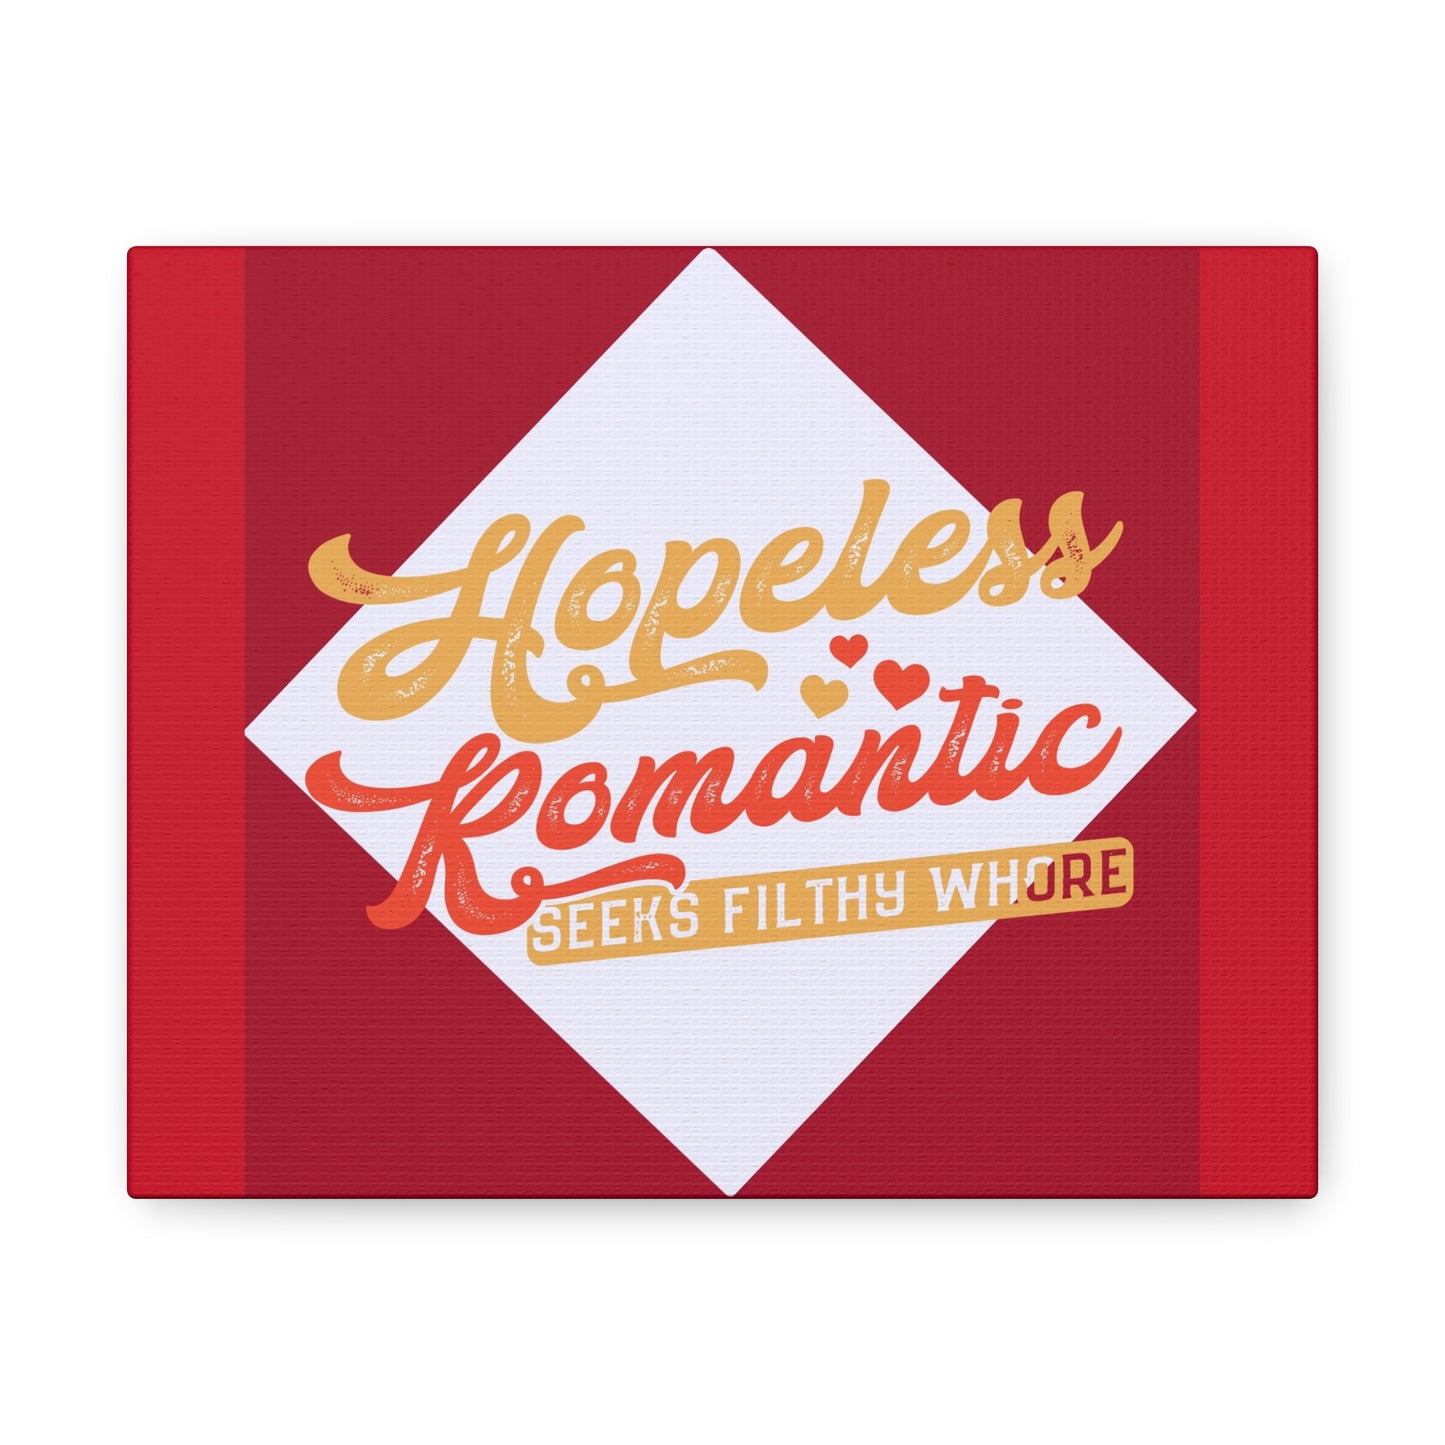 Hopeless Romantic Seeks Filthy Whore Canvas Gallery Wrap